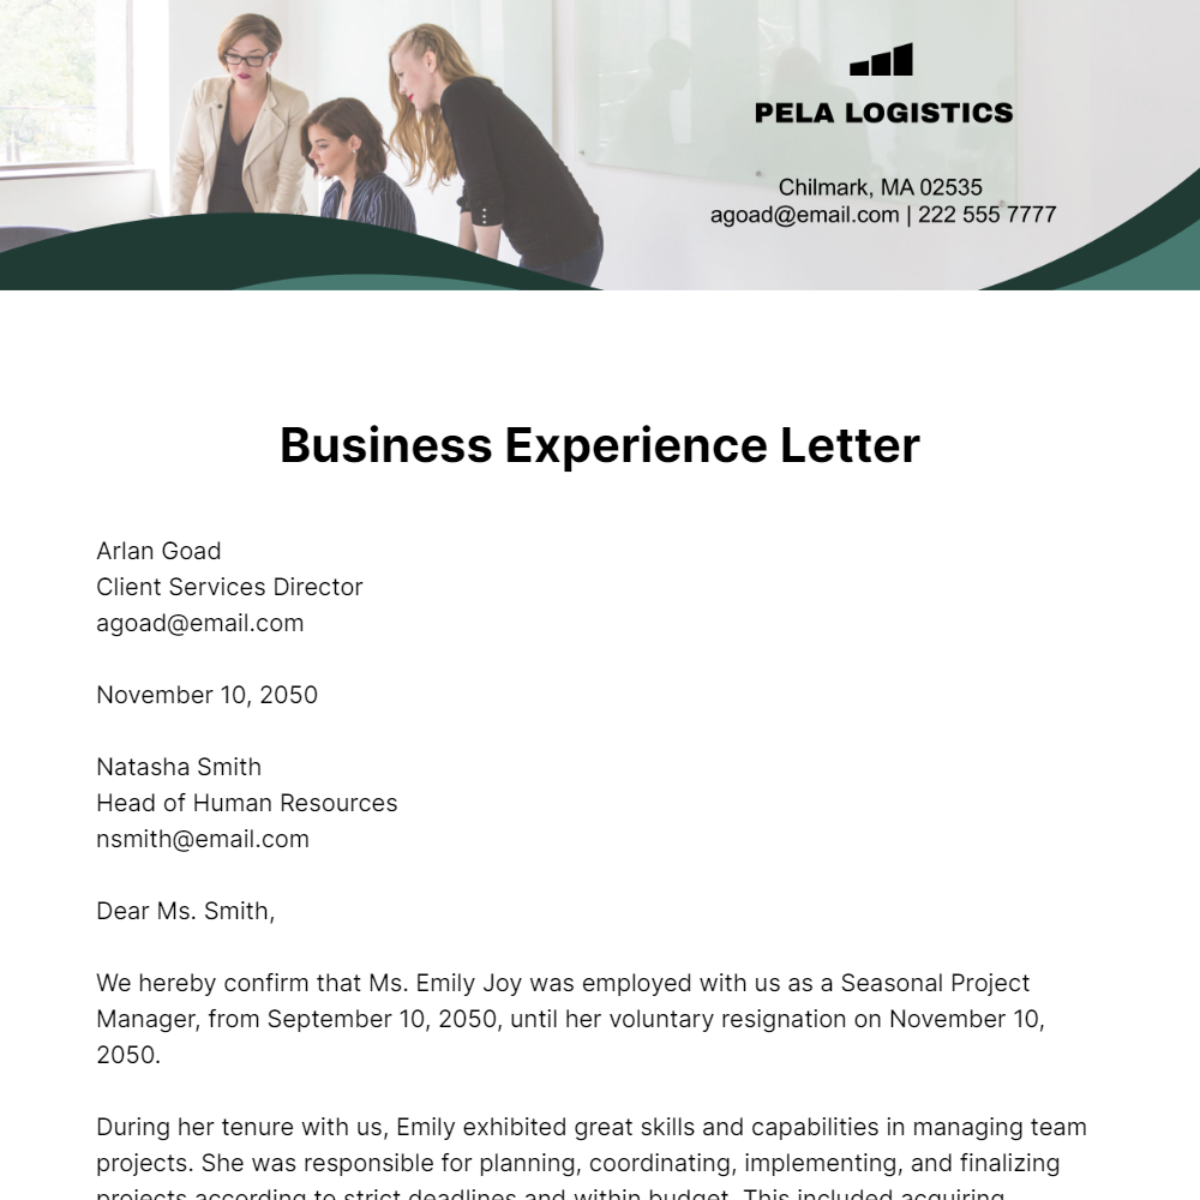 Business Experience Letter   Template